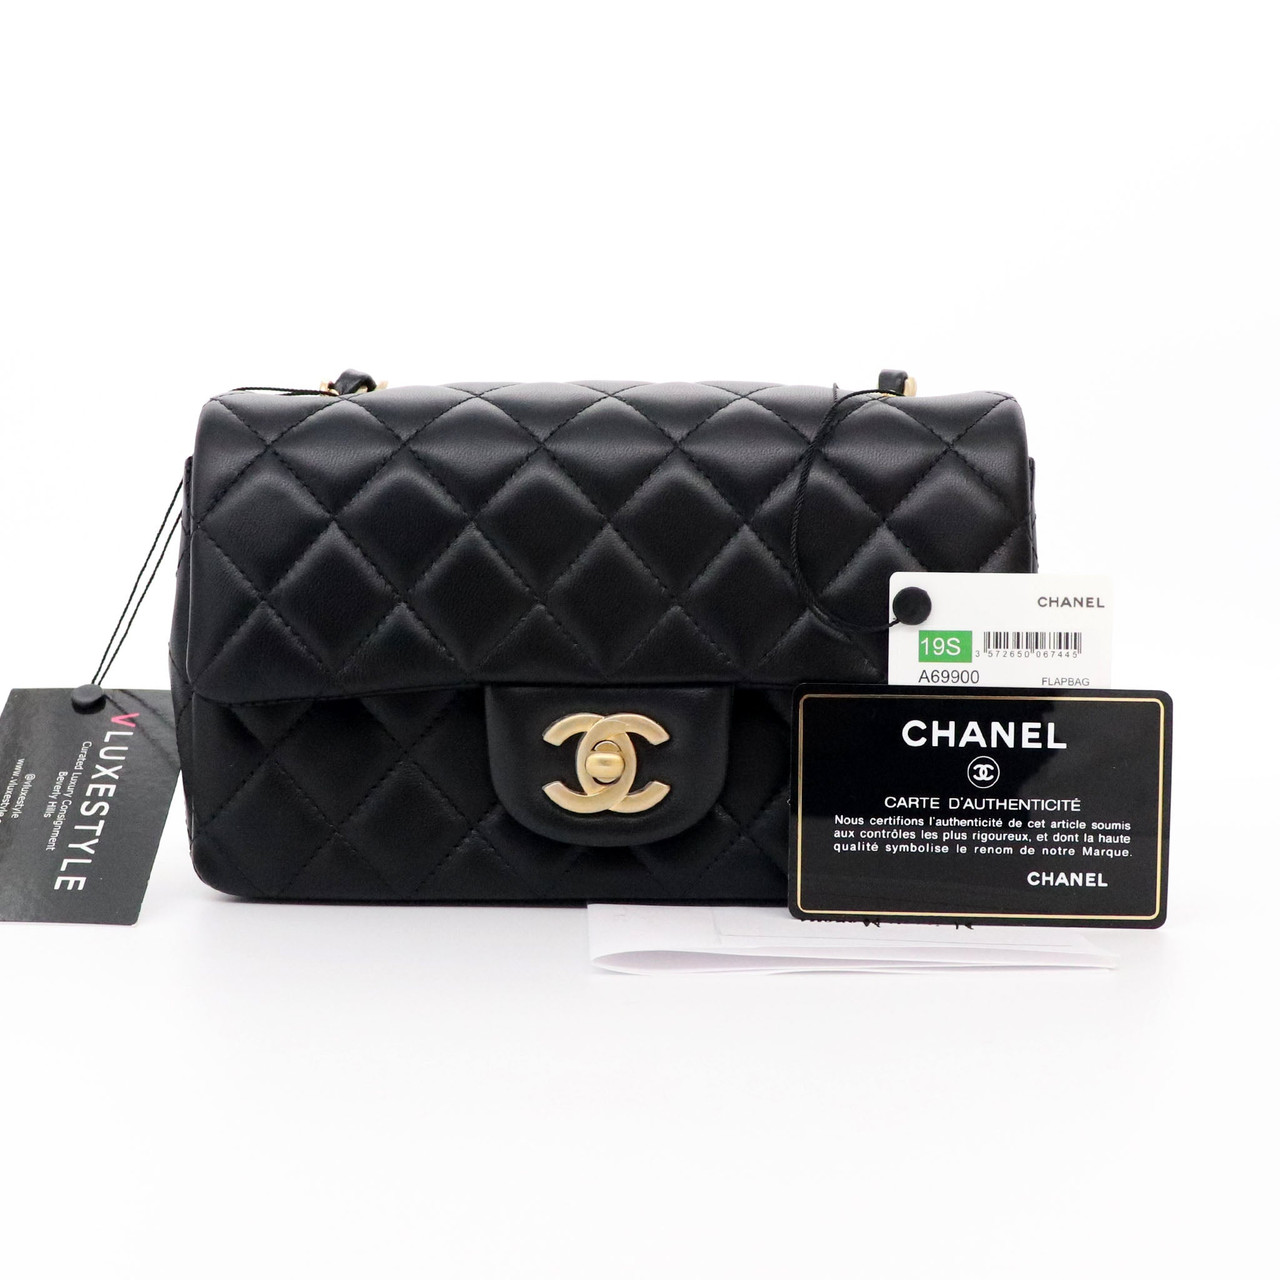 Chanel Classic Mini Rectangular 19S Black Quilted Lambskin with brushed  gold hardware